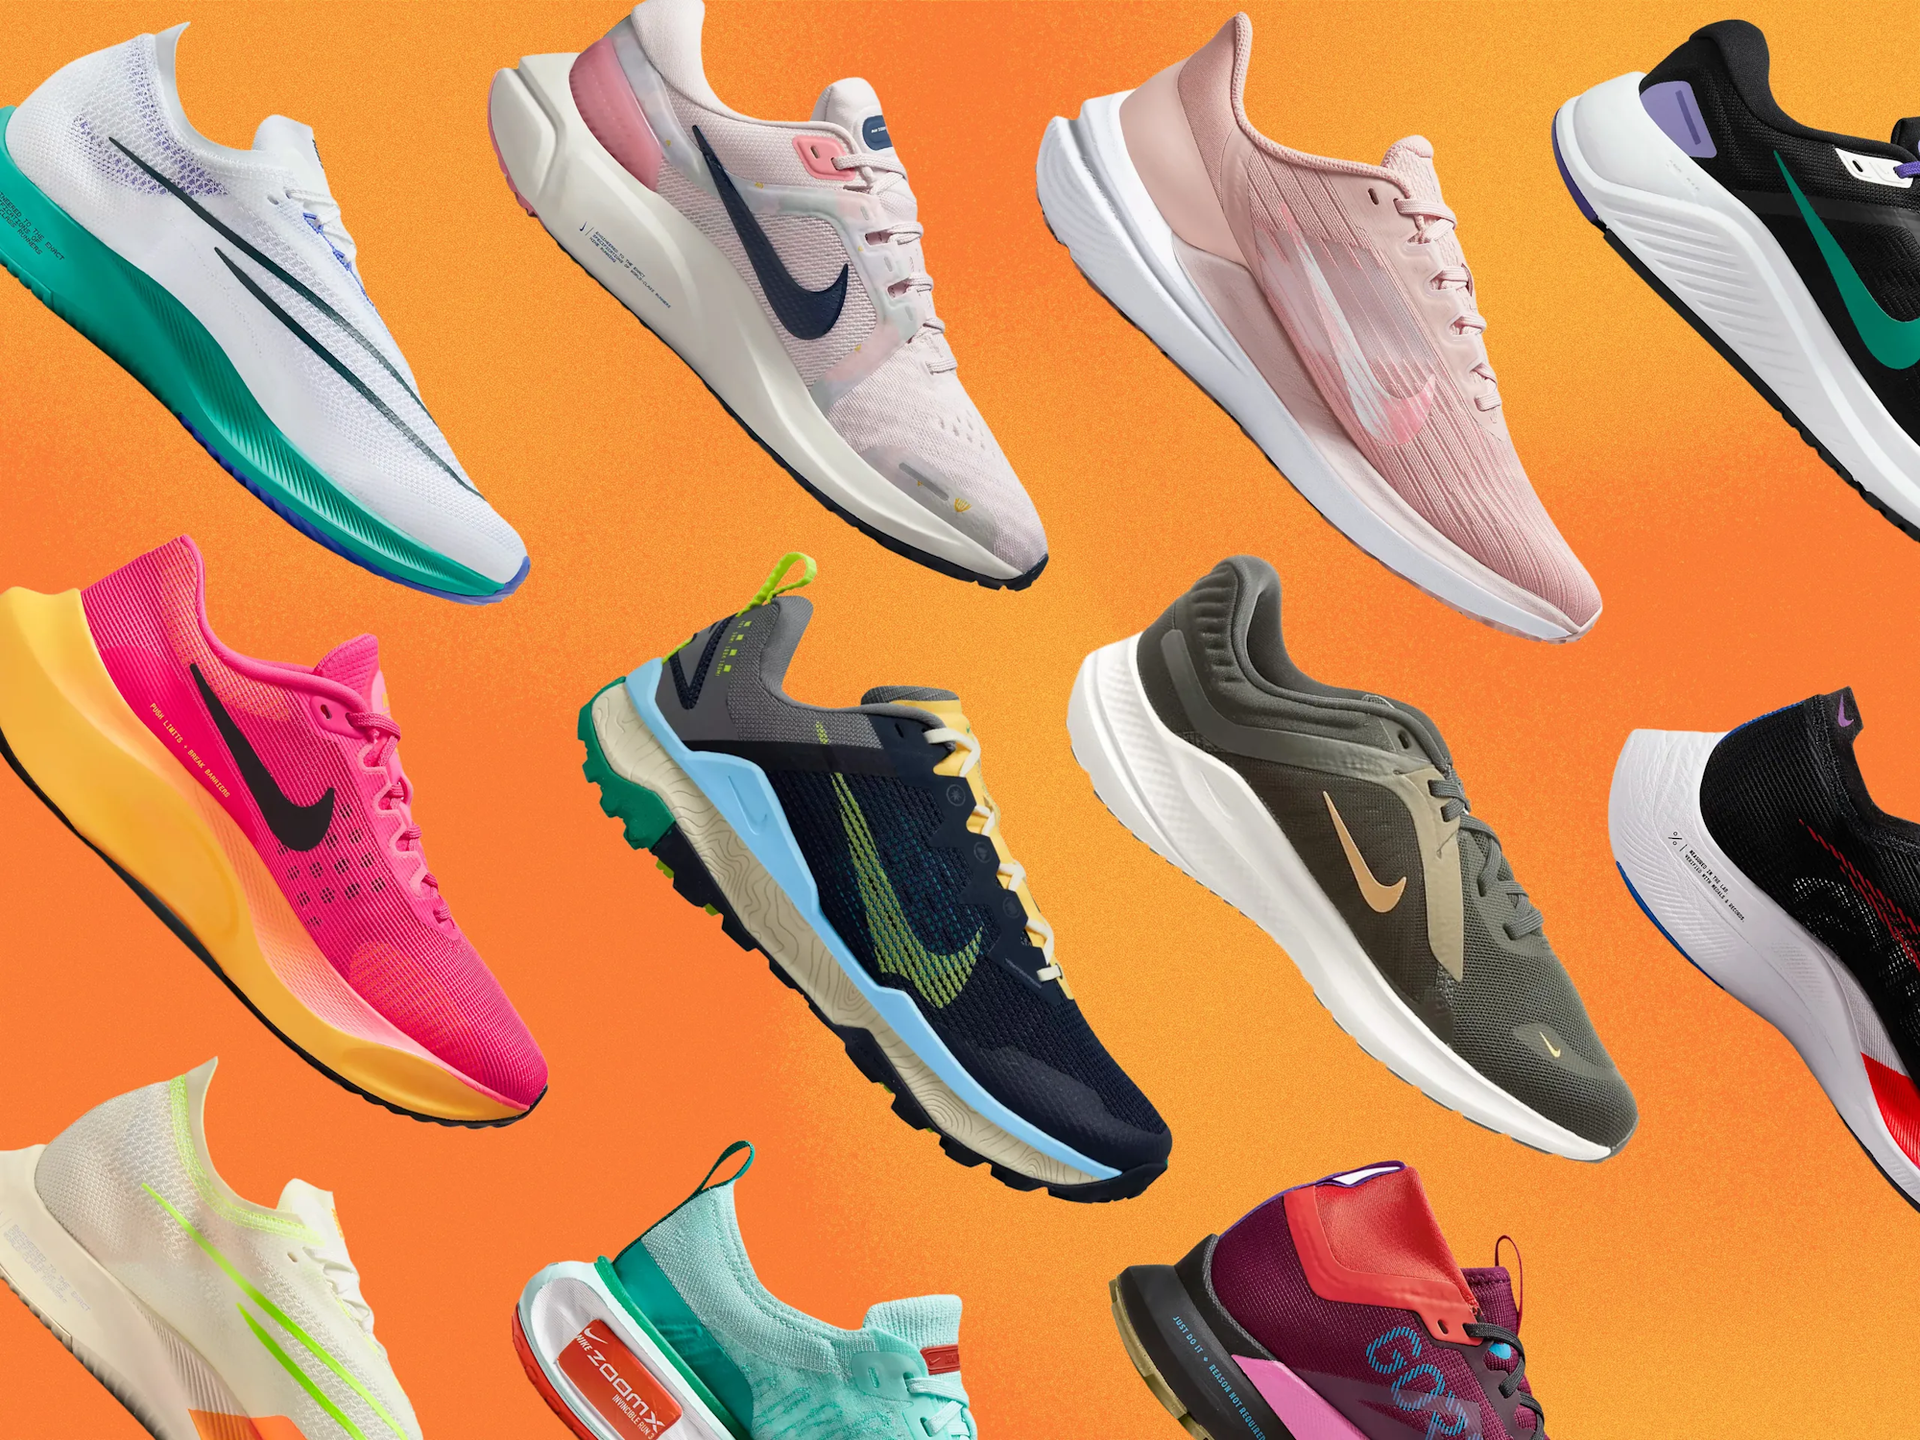 Nike Teacher Discount | Education Discount on Nike Shoes & Athletic Apparel